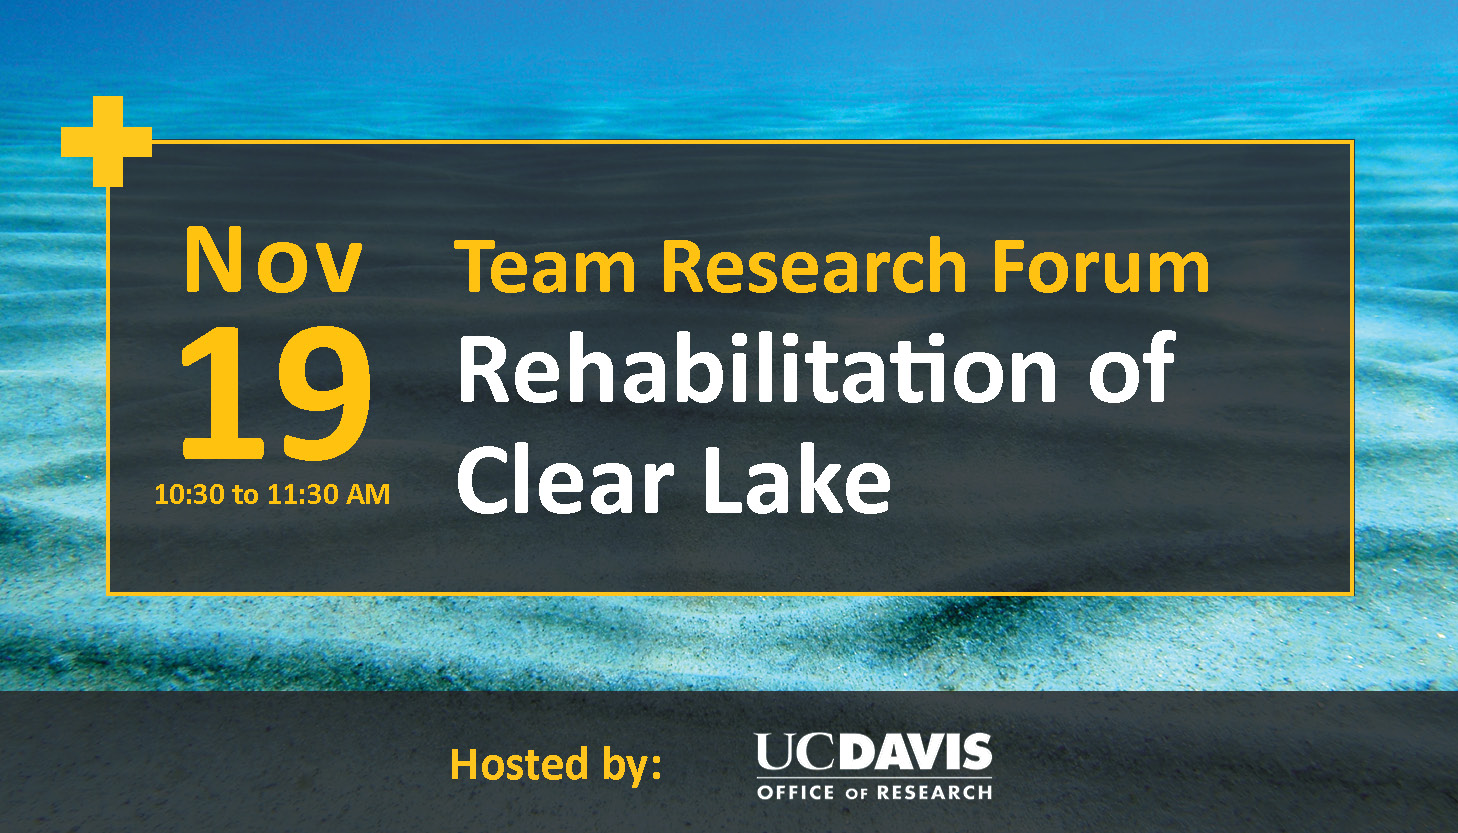 event details, team research forum: rehabilitation of clear lake takes place november 19 10:30 to 11:30 am